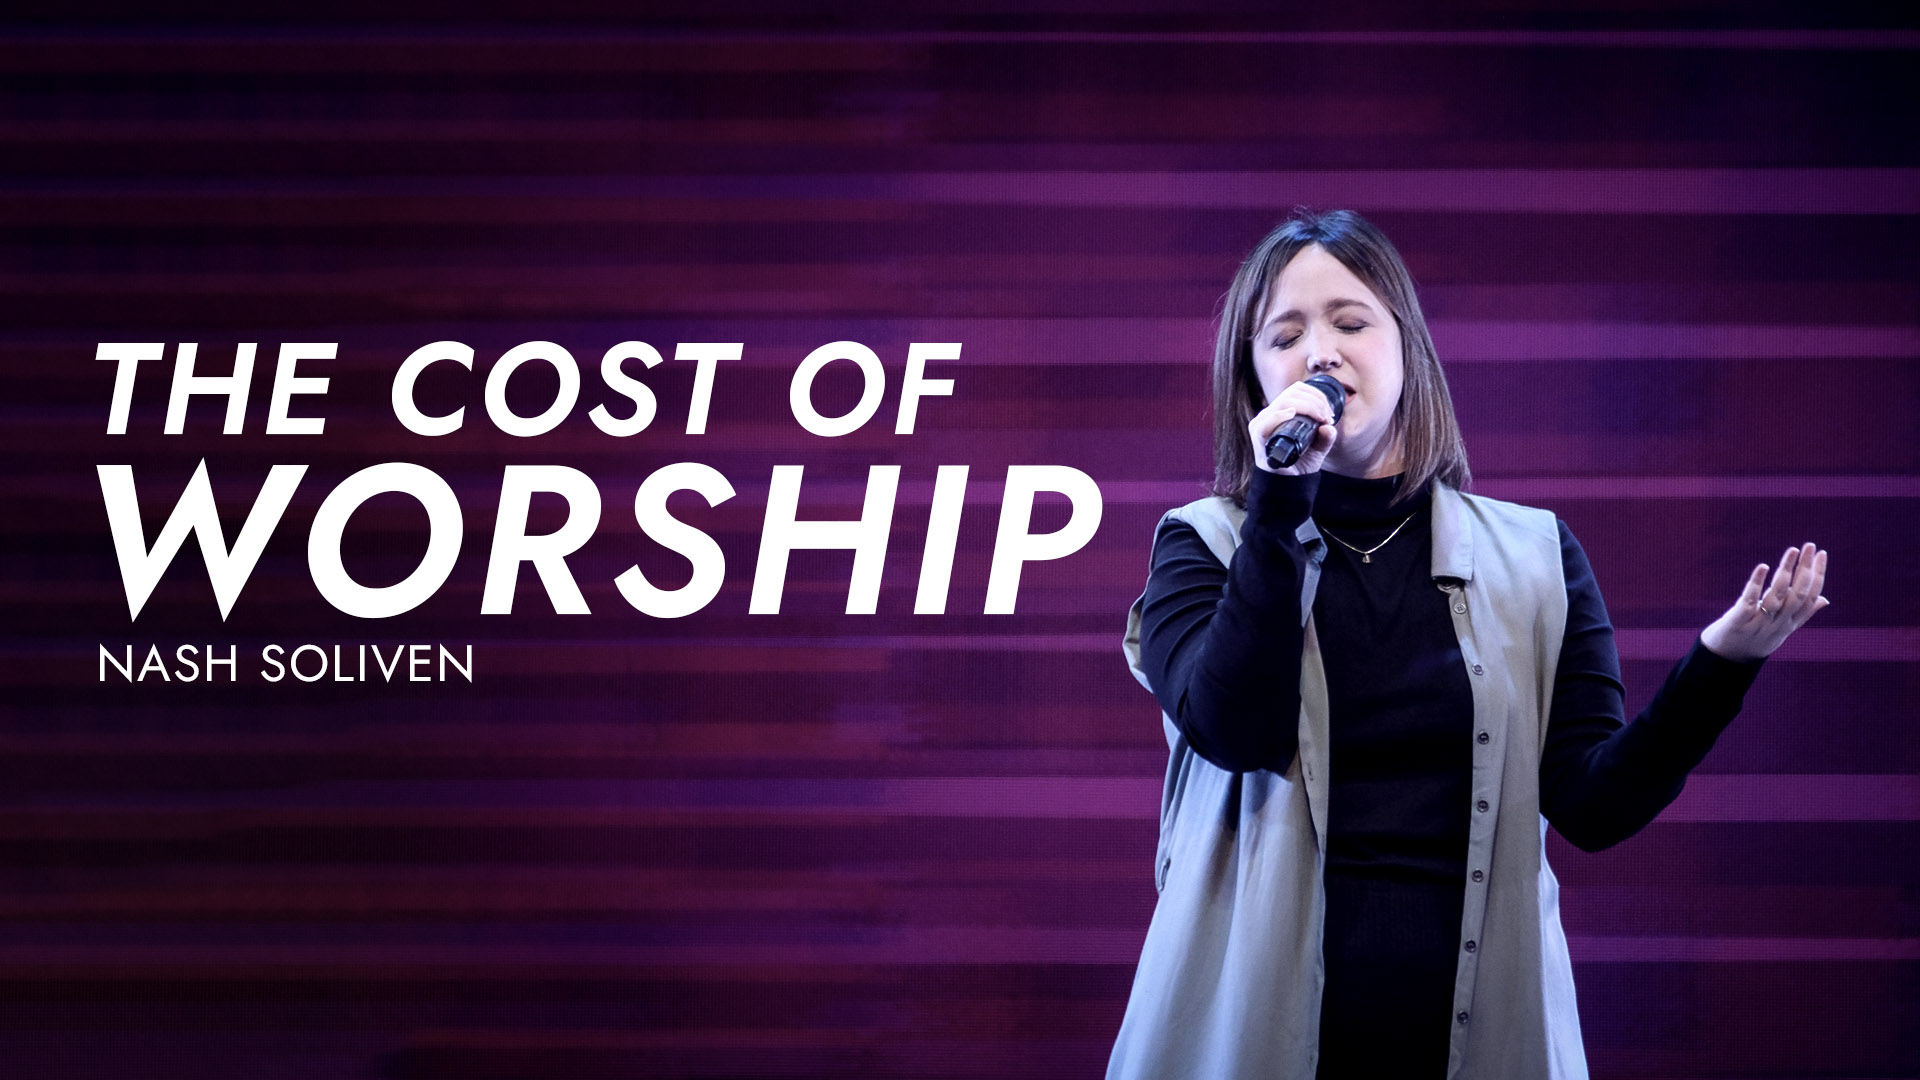 THE COST OF WORSHIP